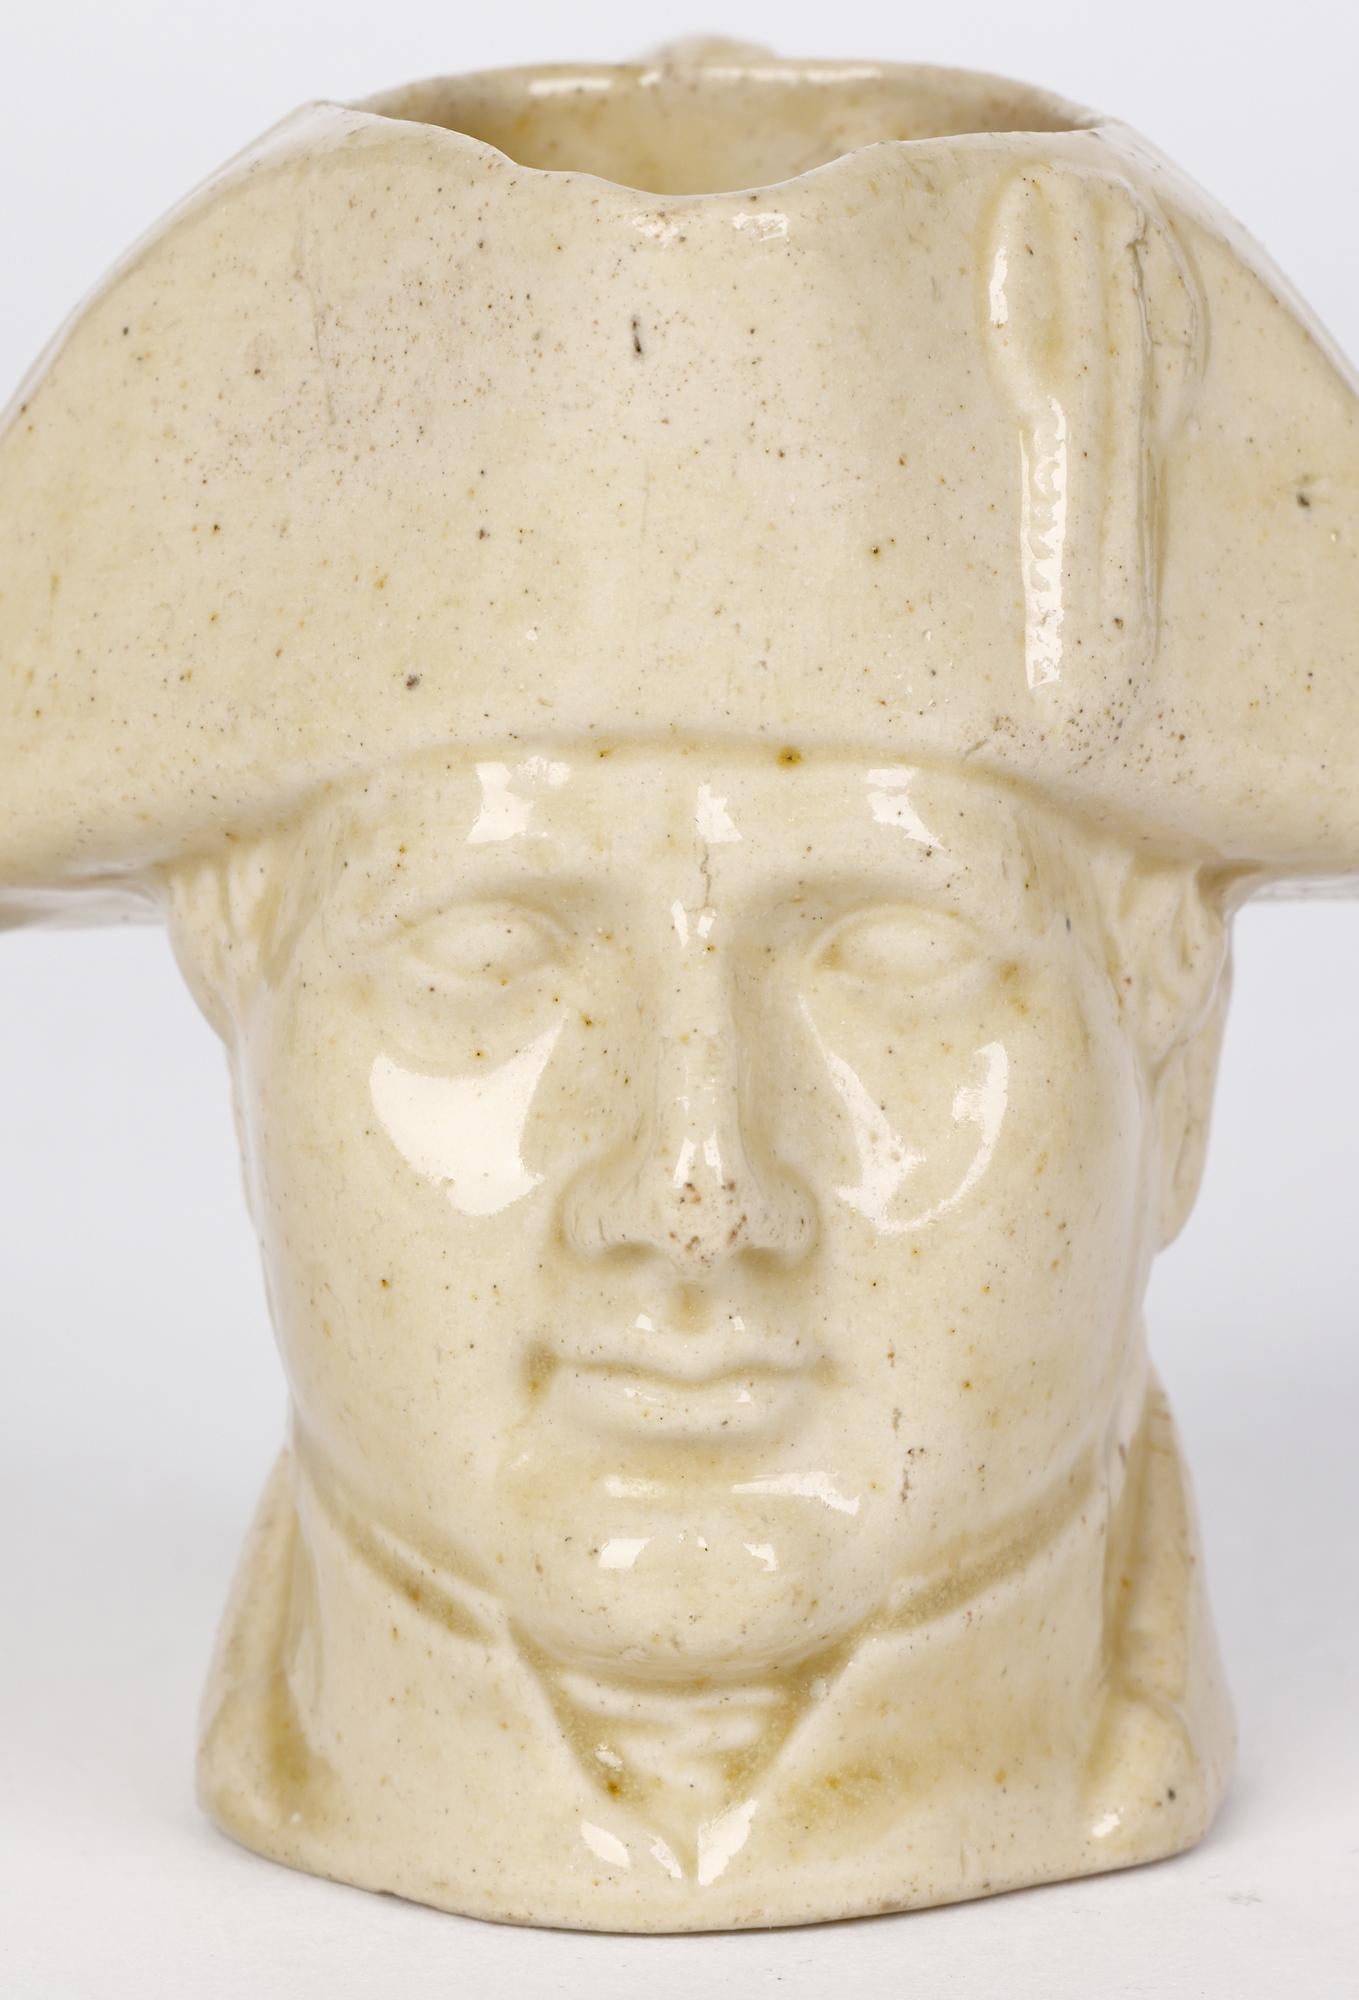 A scarce antique early stoneware salt glazed cream jug modelled as a bust of Napoleon by Stephen Green, Lambeth and dating from around 1840. This delightful small sized jug is modelled with the head of Napoleon, his collar forming the lower rim and